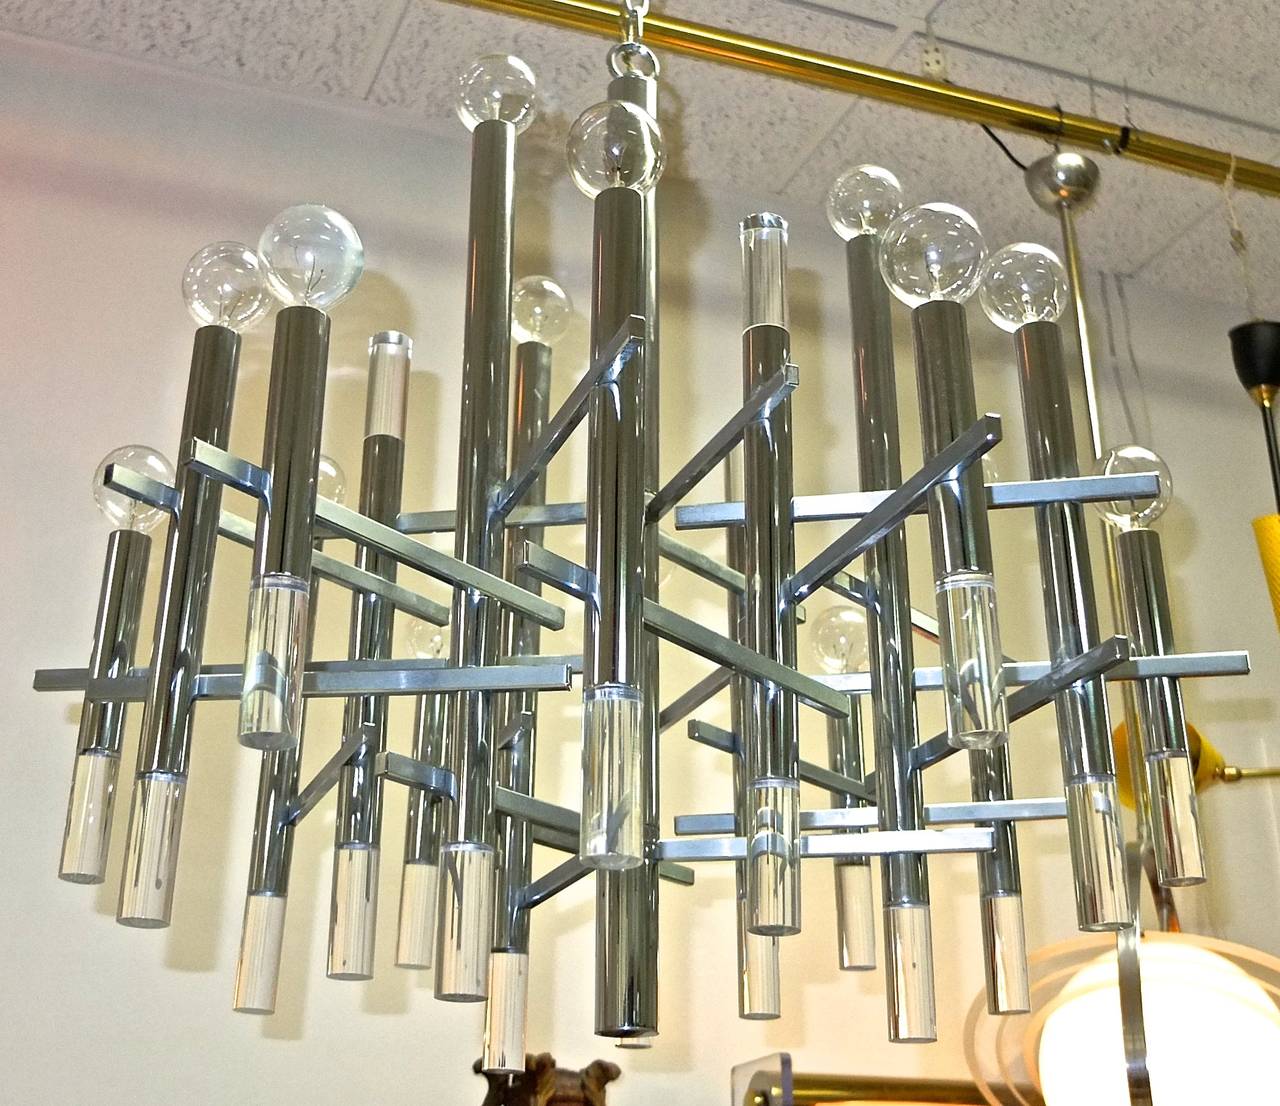 SATURDAY SALE Boston Design Center

Modernist chandelier by Gaetano Sciolari in asymmetric geometric brutalist design with vertical tubular chrome stems with cylindrical lucite bottom finials, and horizontal; brushed stainless rectilinear